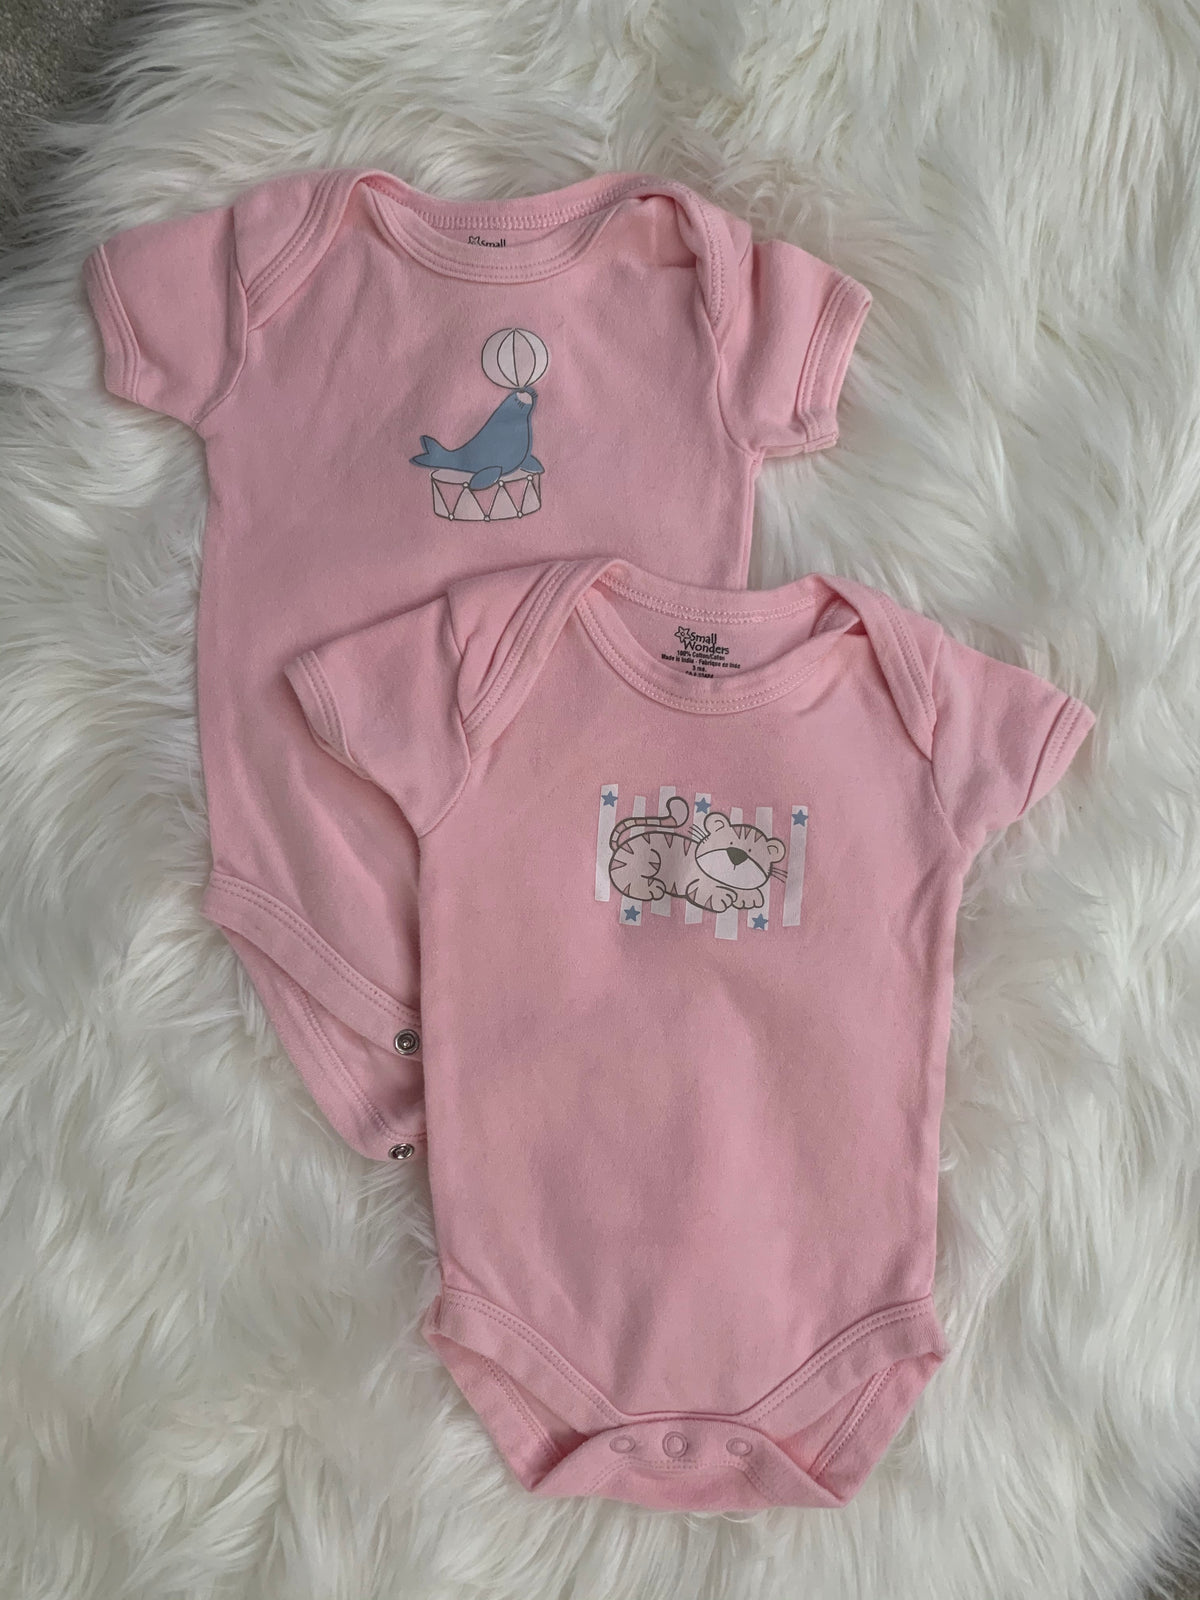 Short Sleeve Onesies - Two (Girls Size 3M)